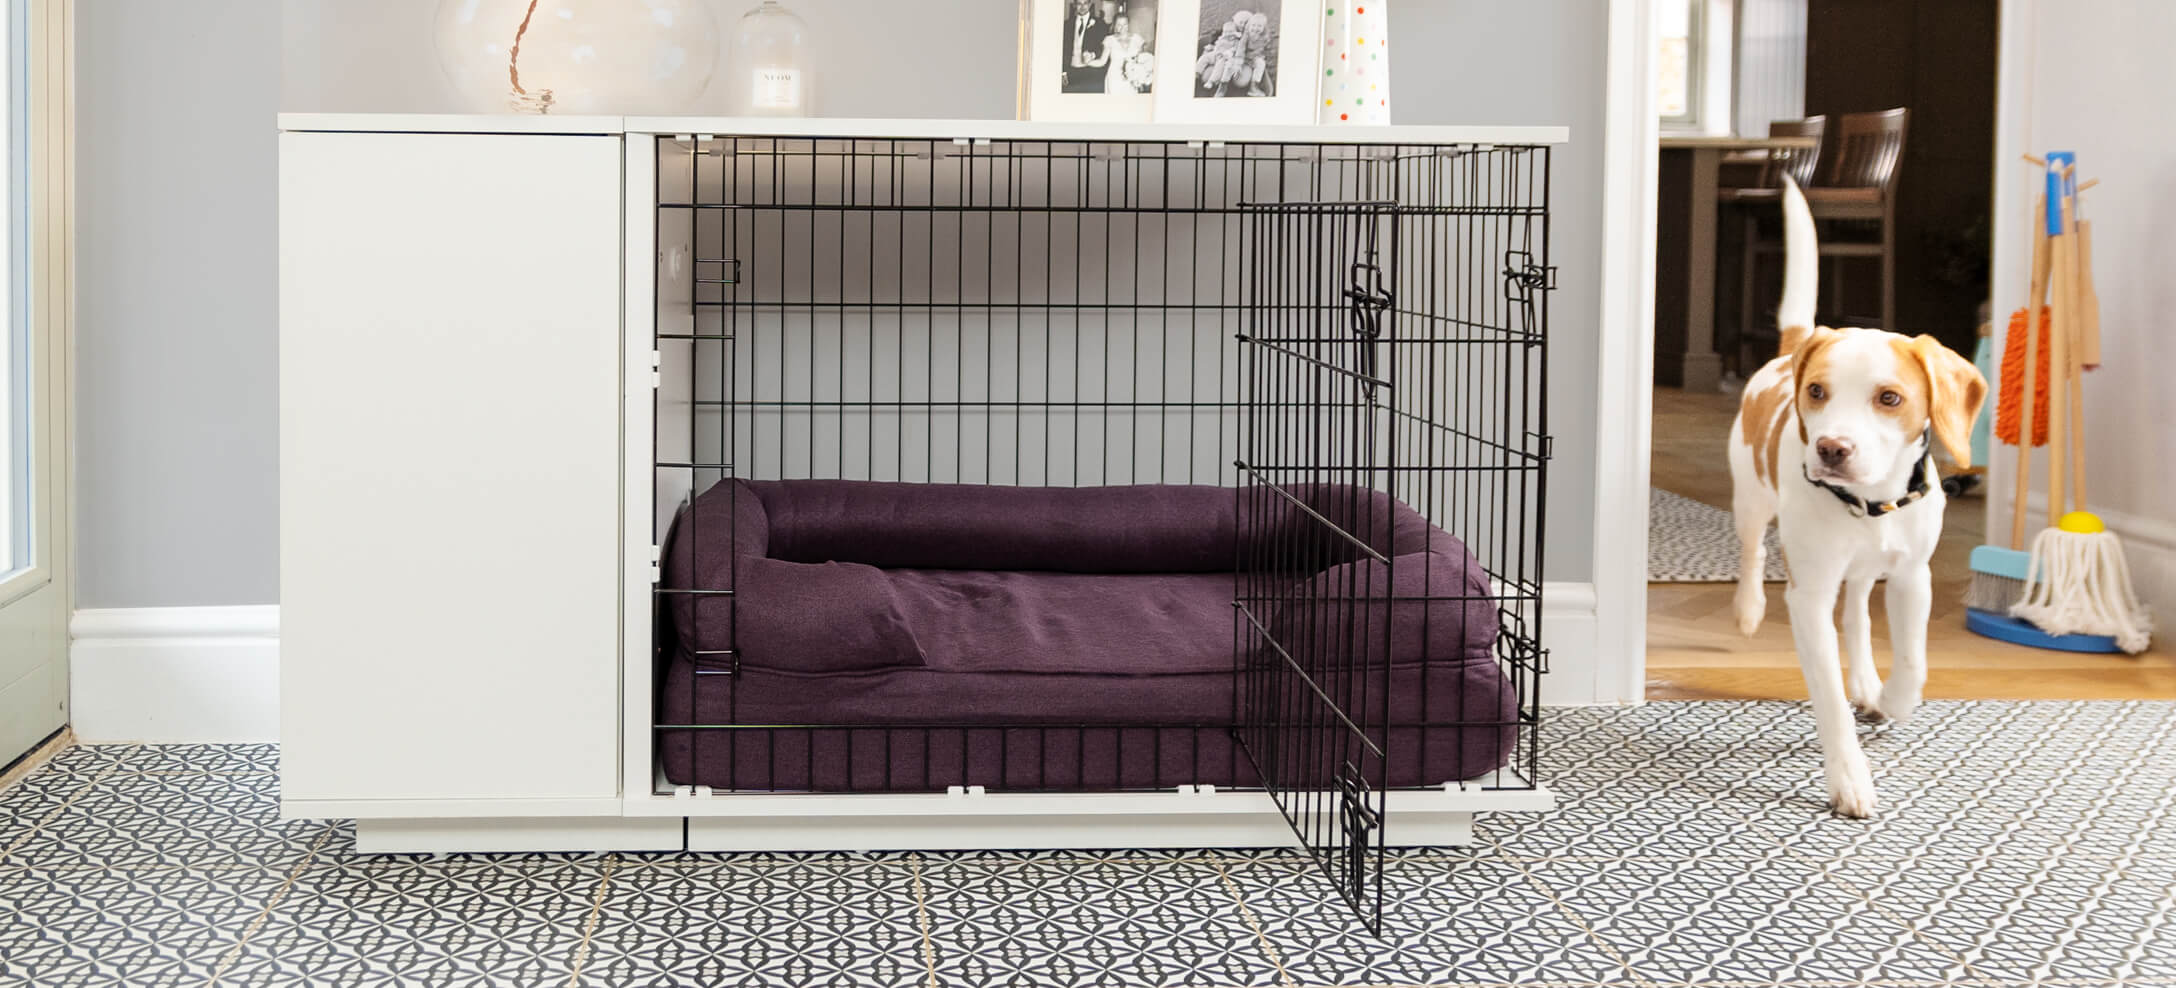 https://www.omlet.us/images/catalog/2022/07/04/indoor-dog-crate-with-wardrobe-and-luxury-dog-bed.jpg